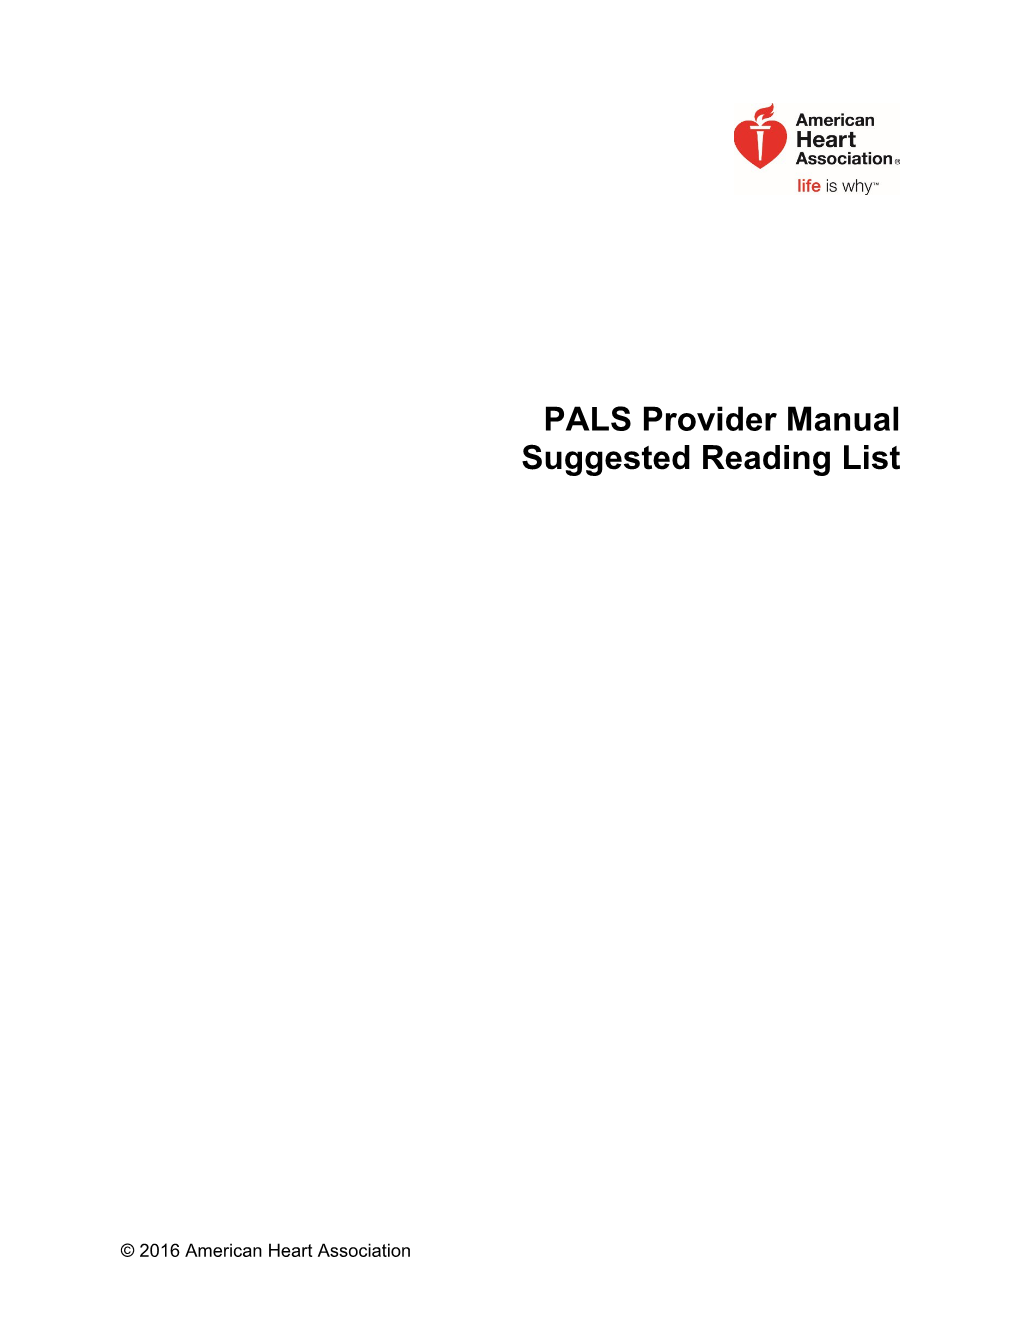 PALS Provider Manualsuggested Reading List